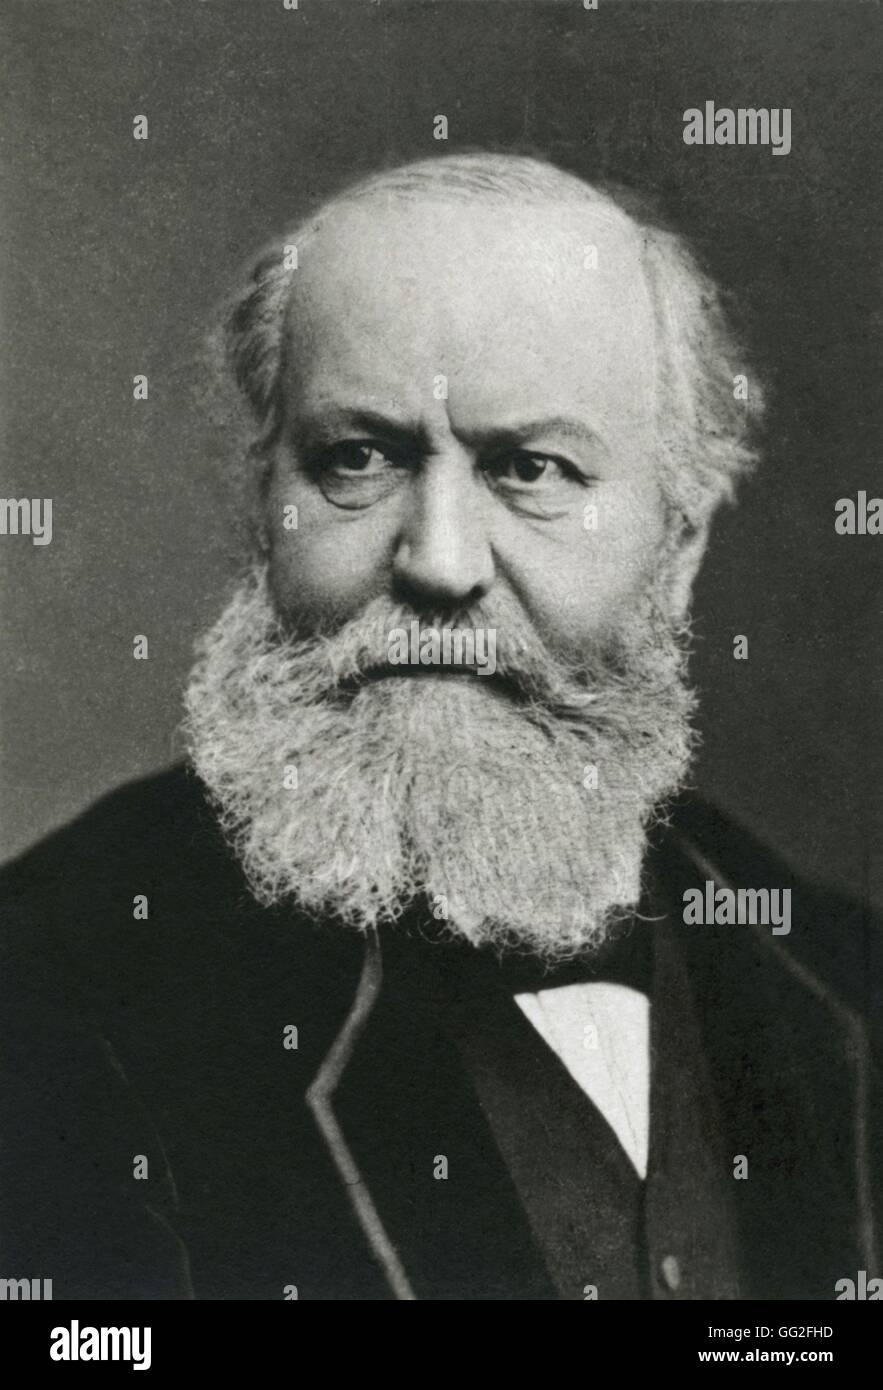 Portrait of Charles Gounod, French composer. 19th century Stock Photo